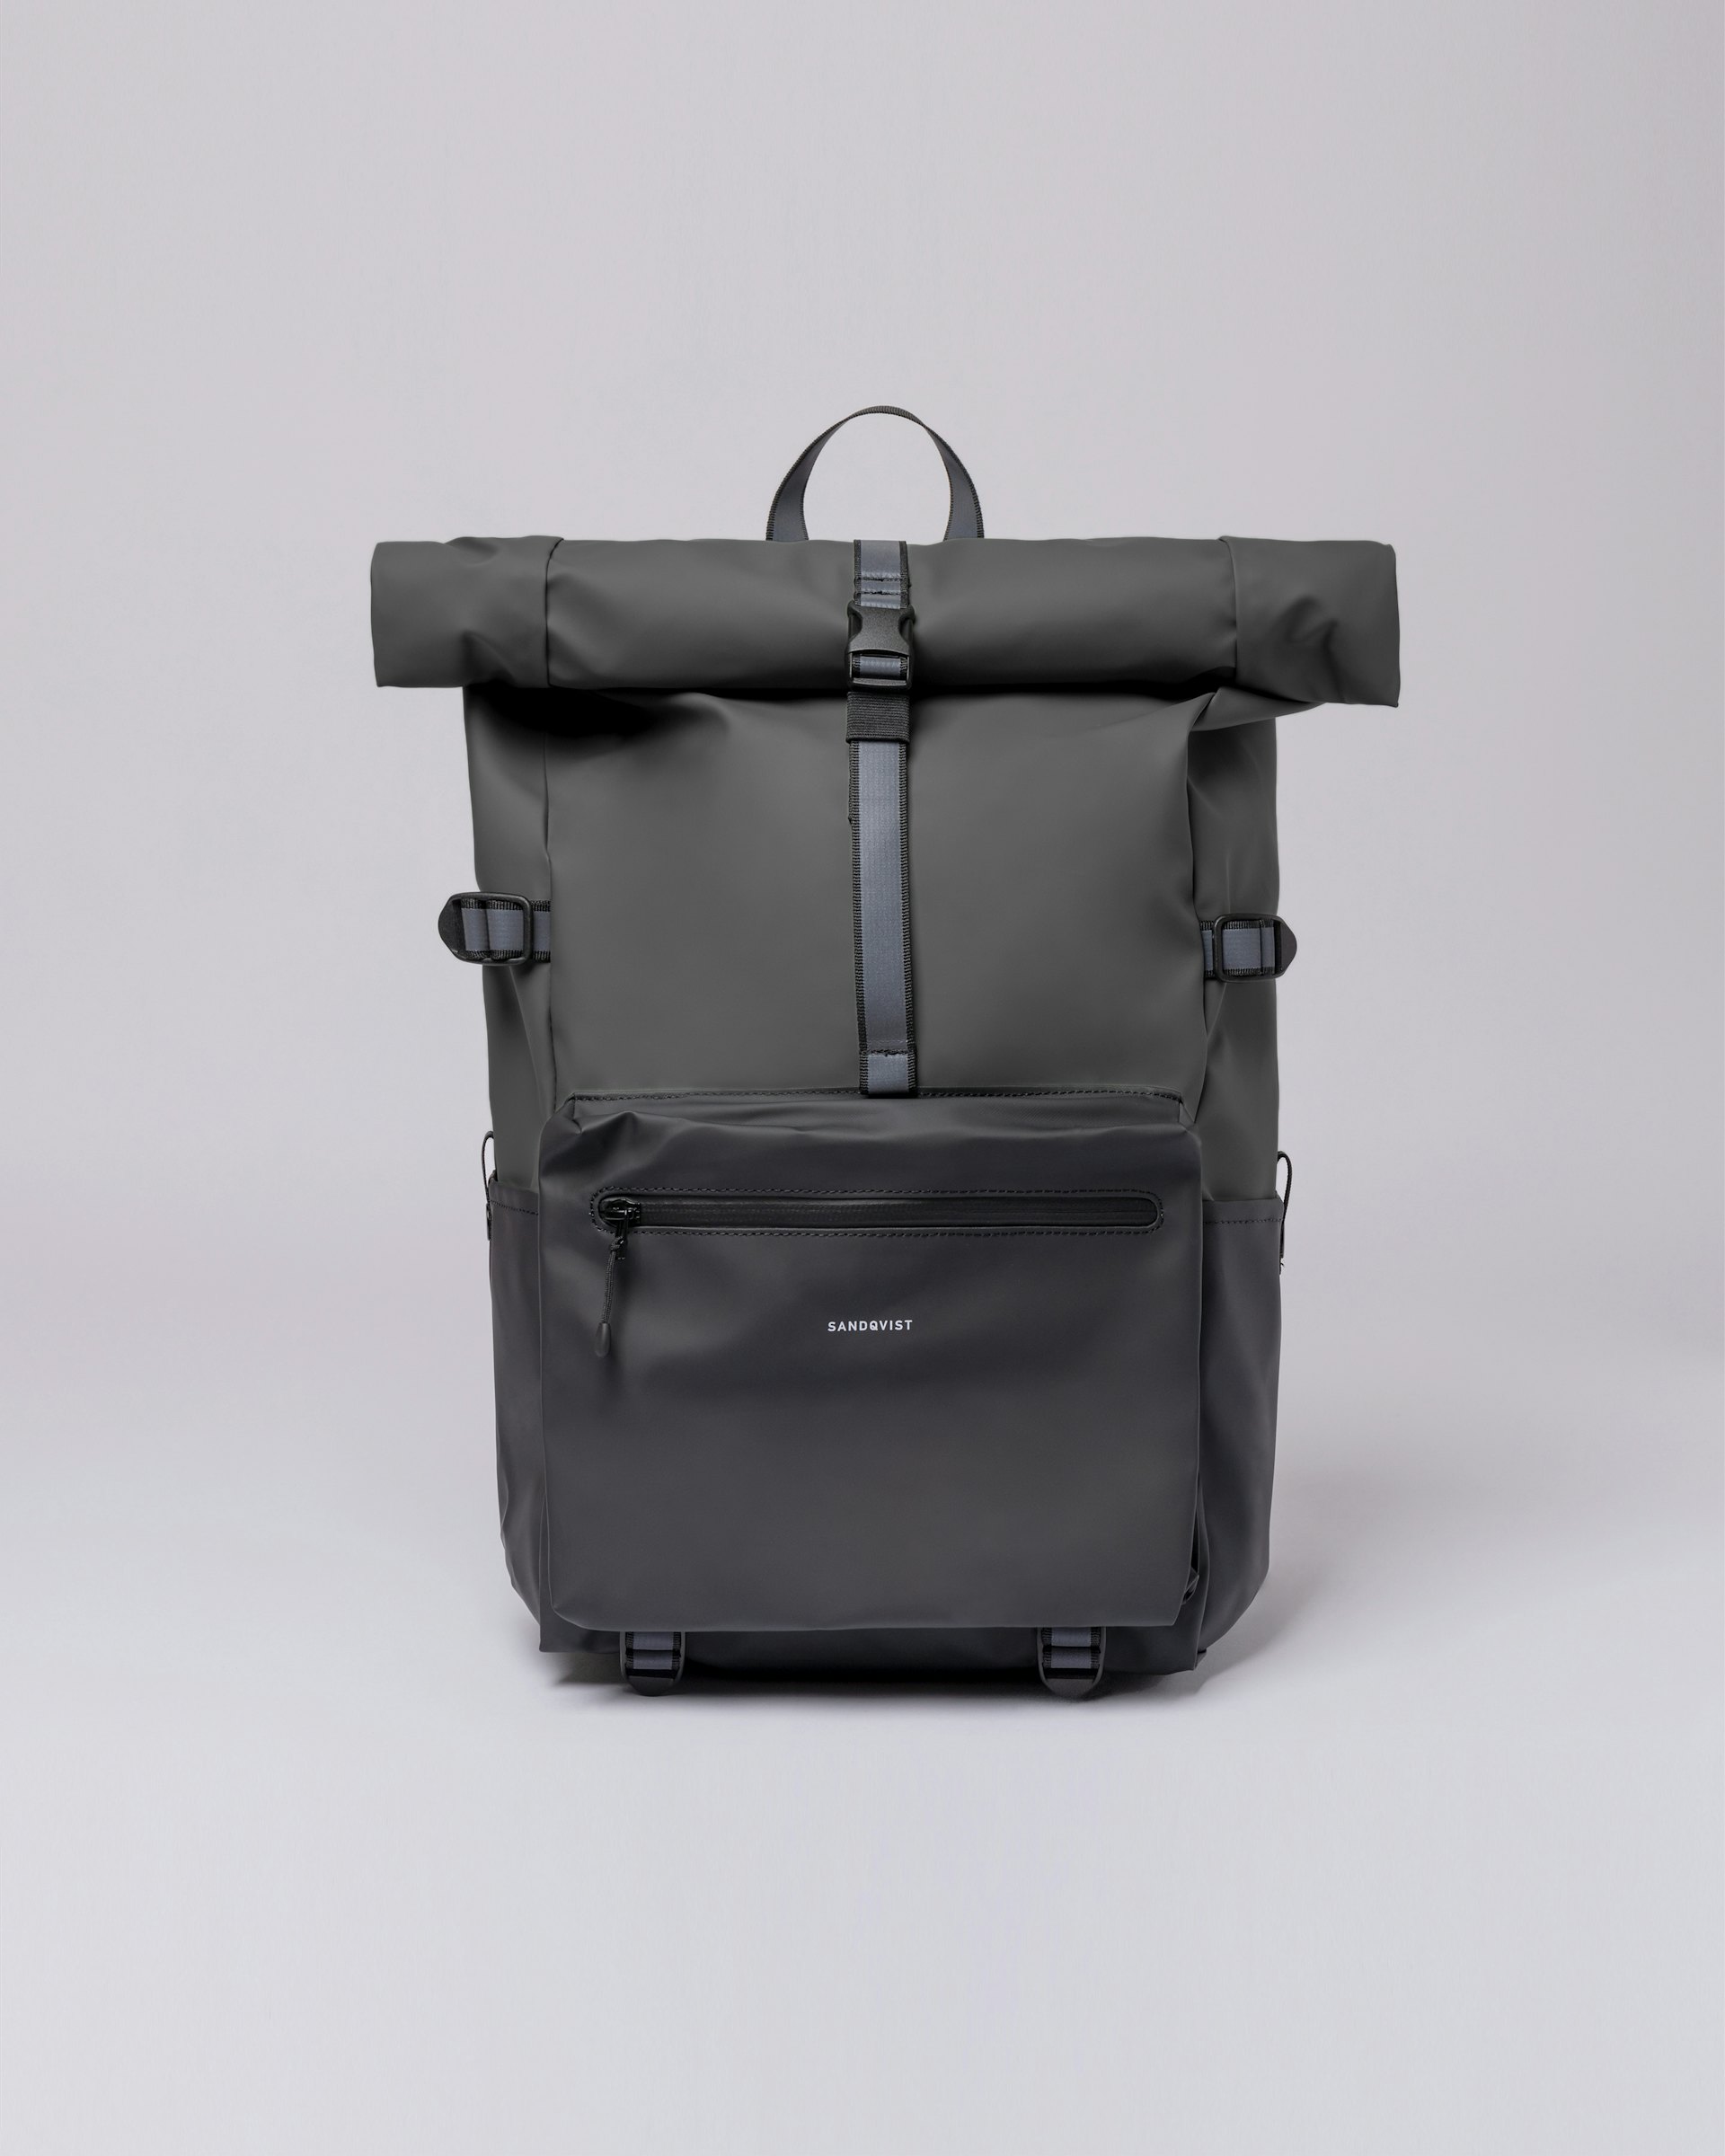 Ruben 2.0 belongs to the category Backpacks and is in color night grey